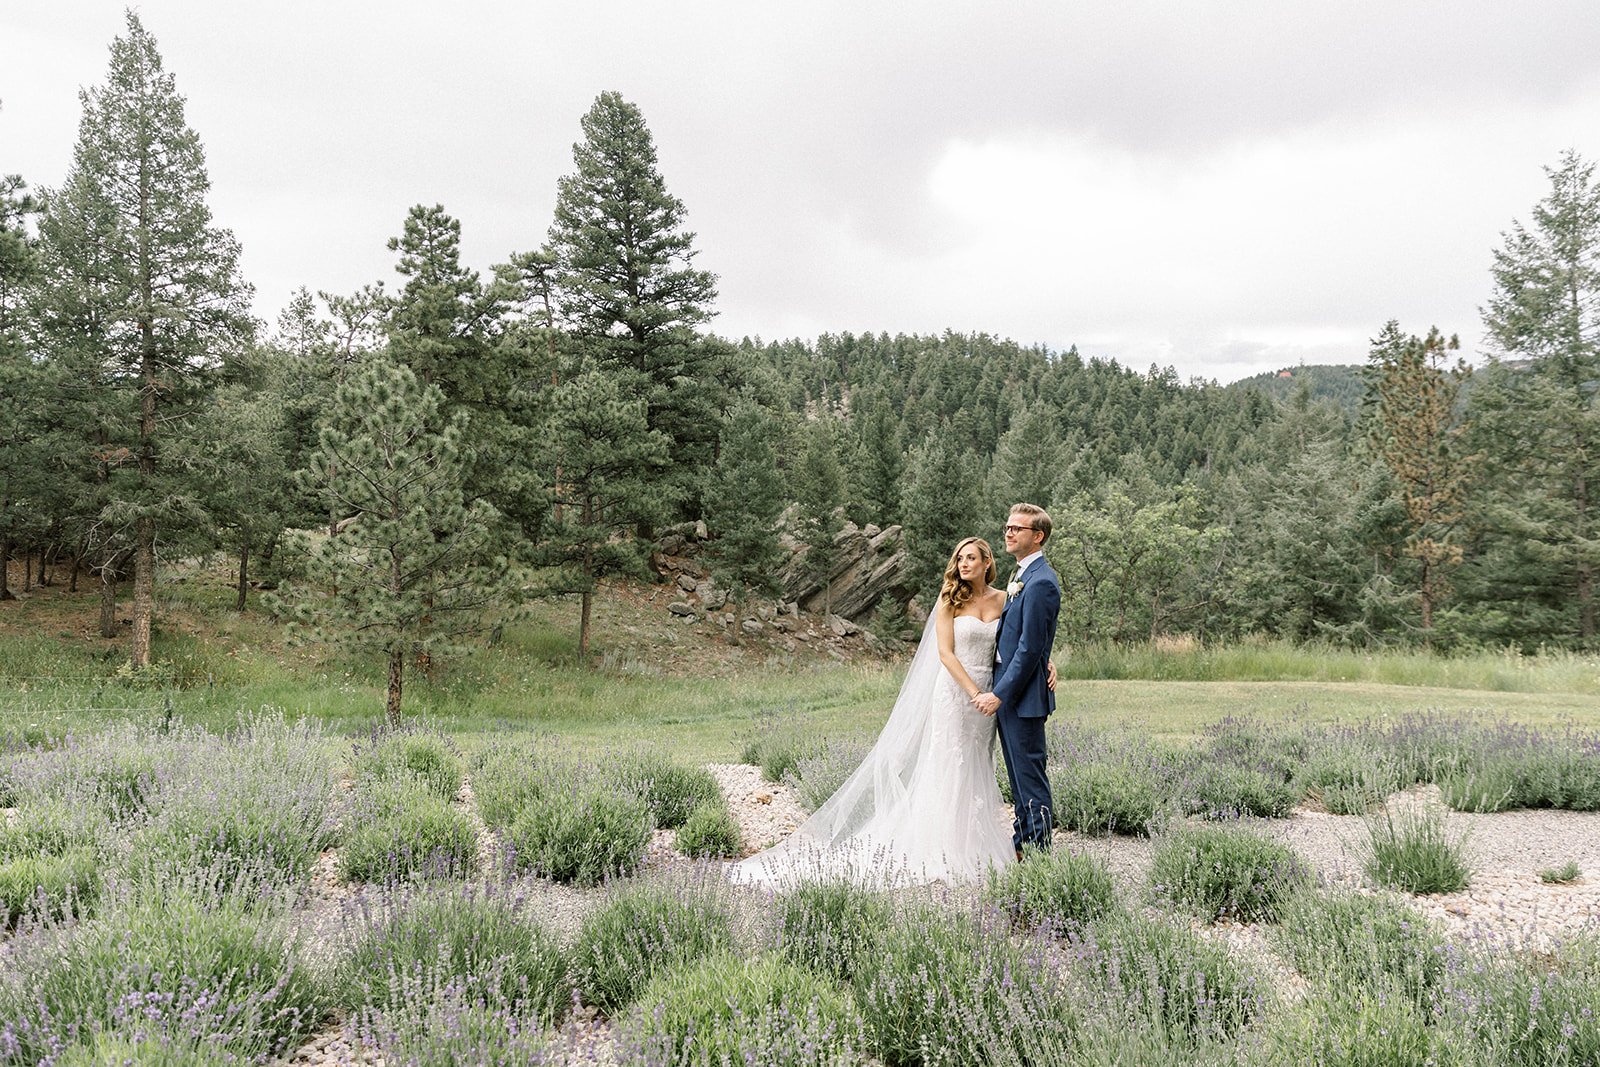 C+J_Woodlands_Morrison_Colorado_Wedding_by_Diana_Coulter_First Look-37.jpg